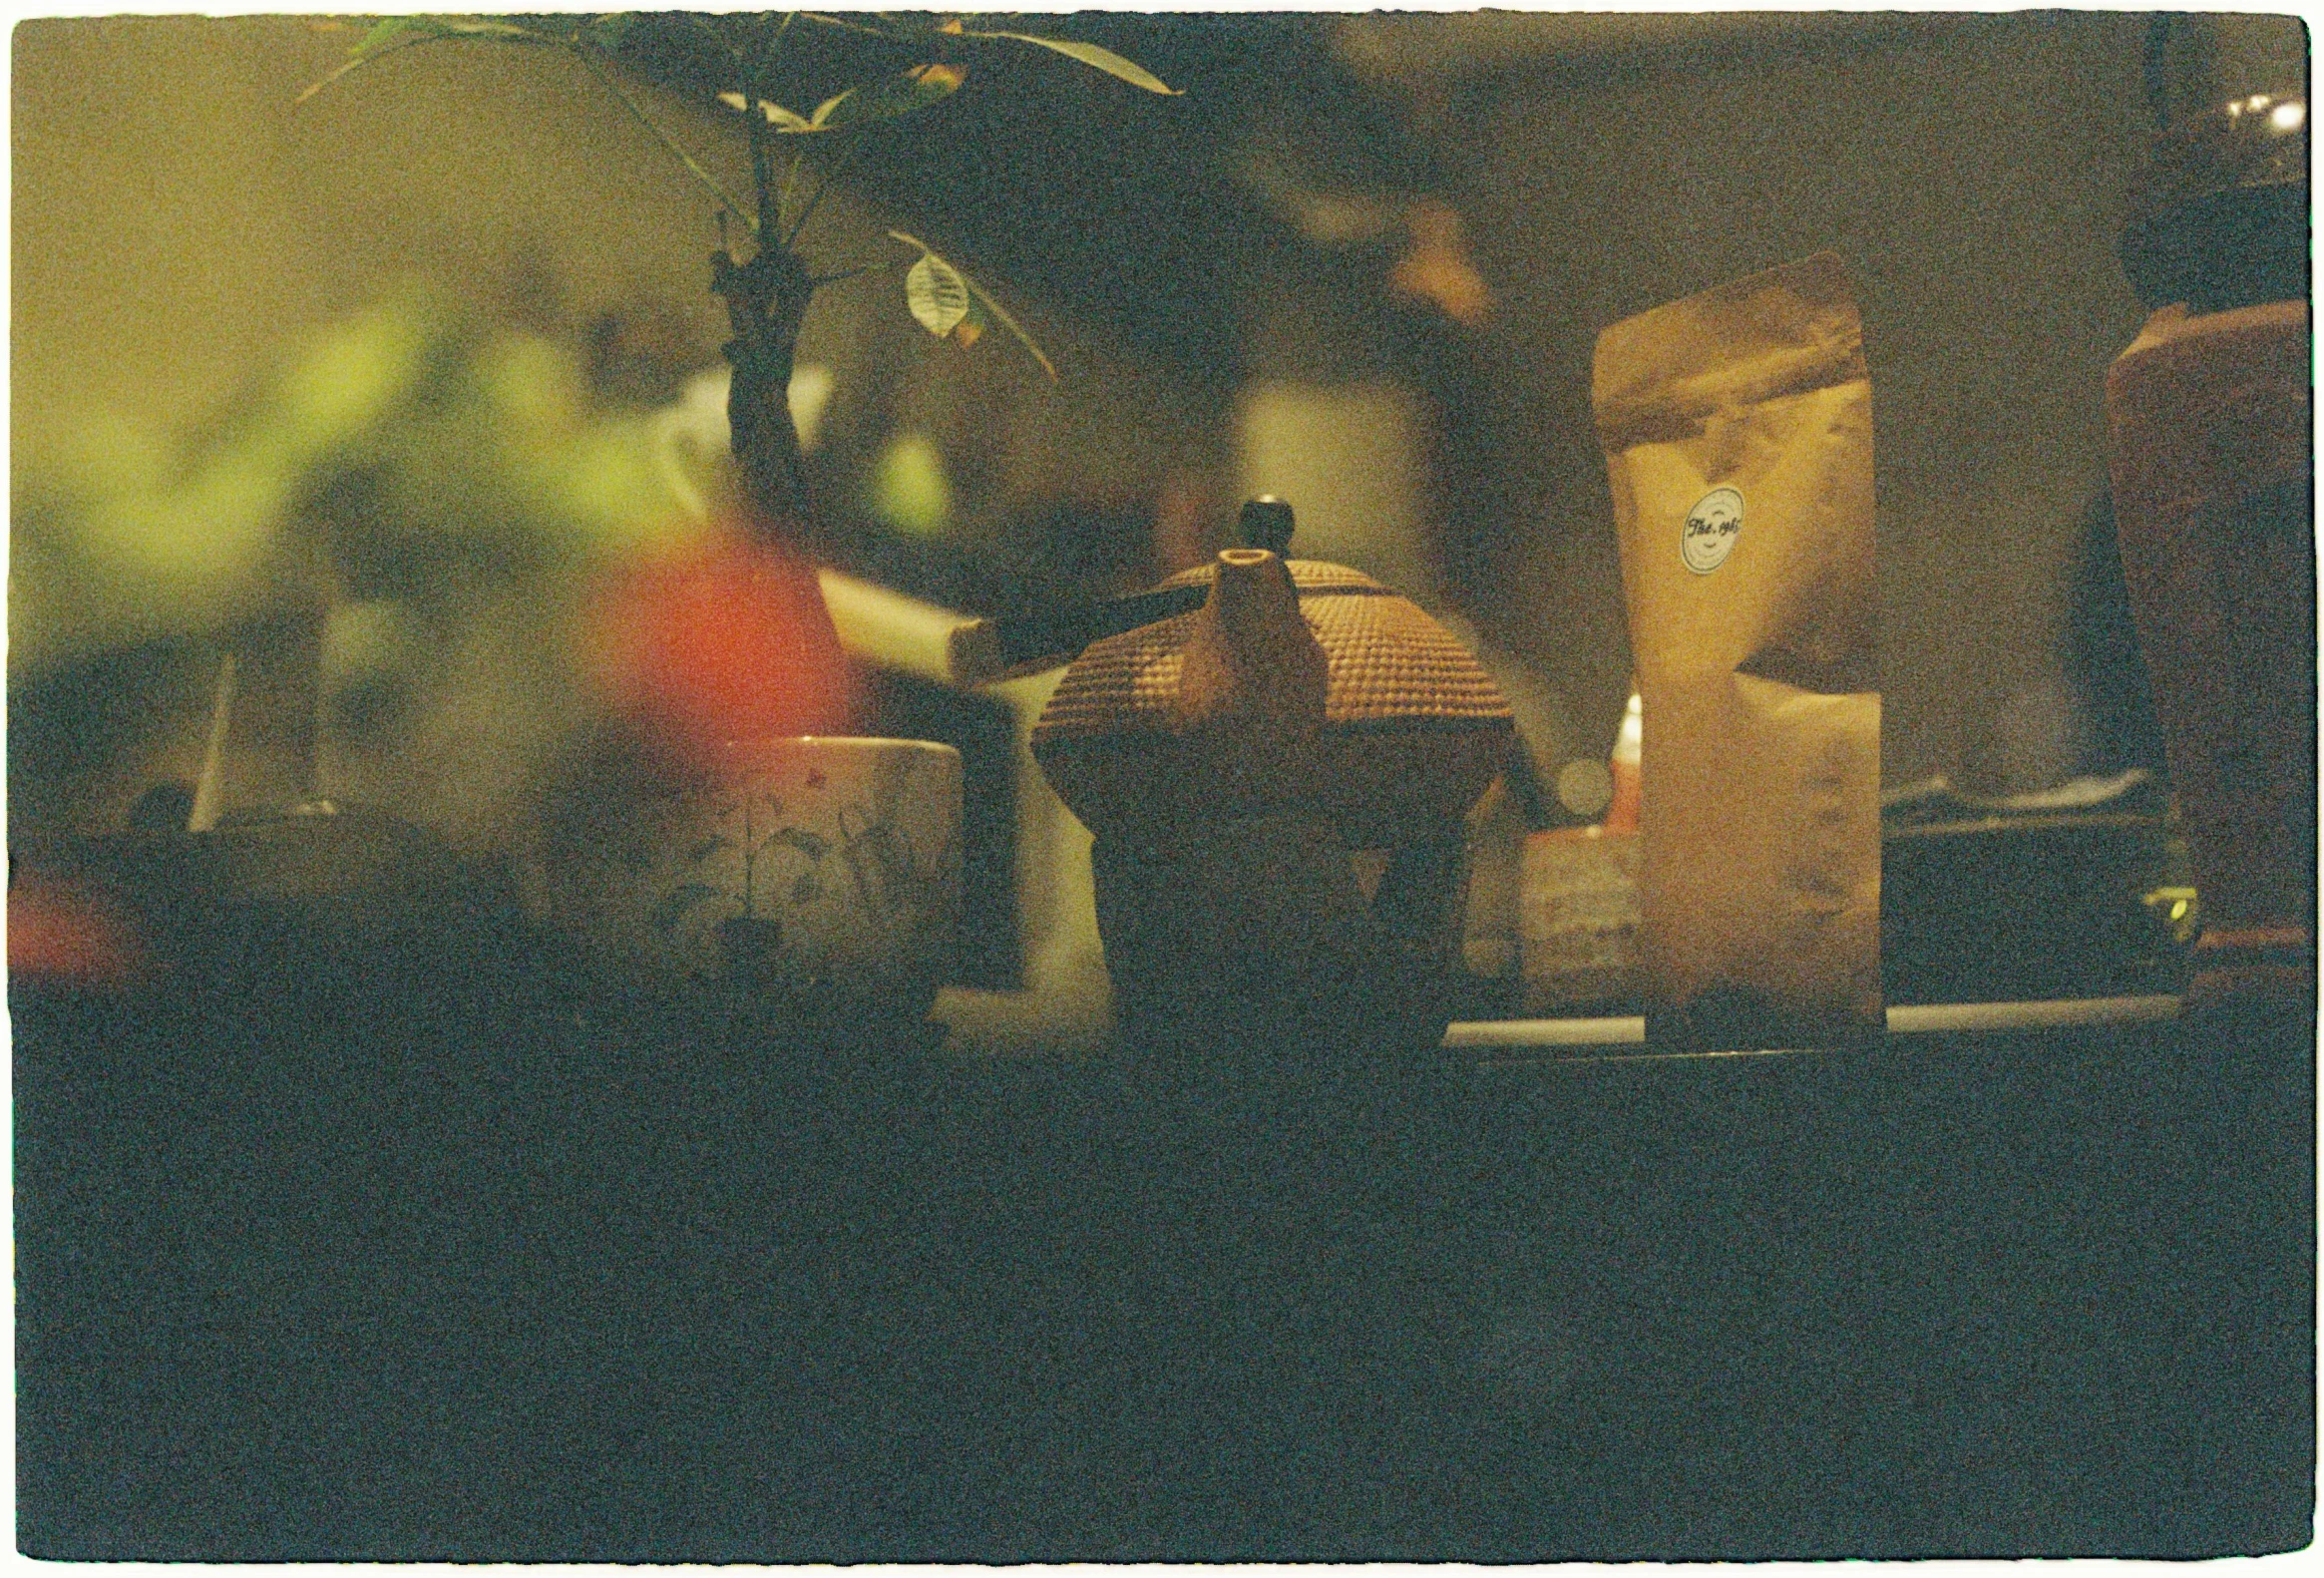 a blurry po of a counter top and some paper bags